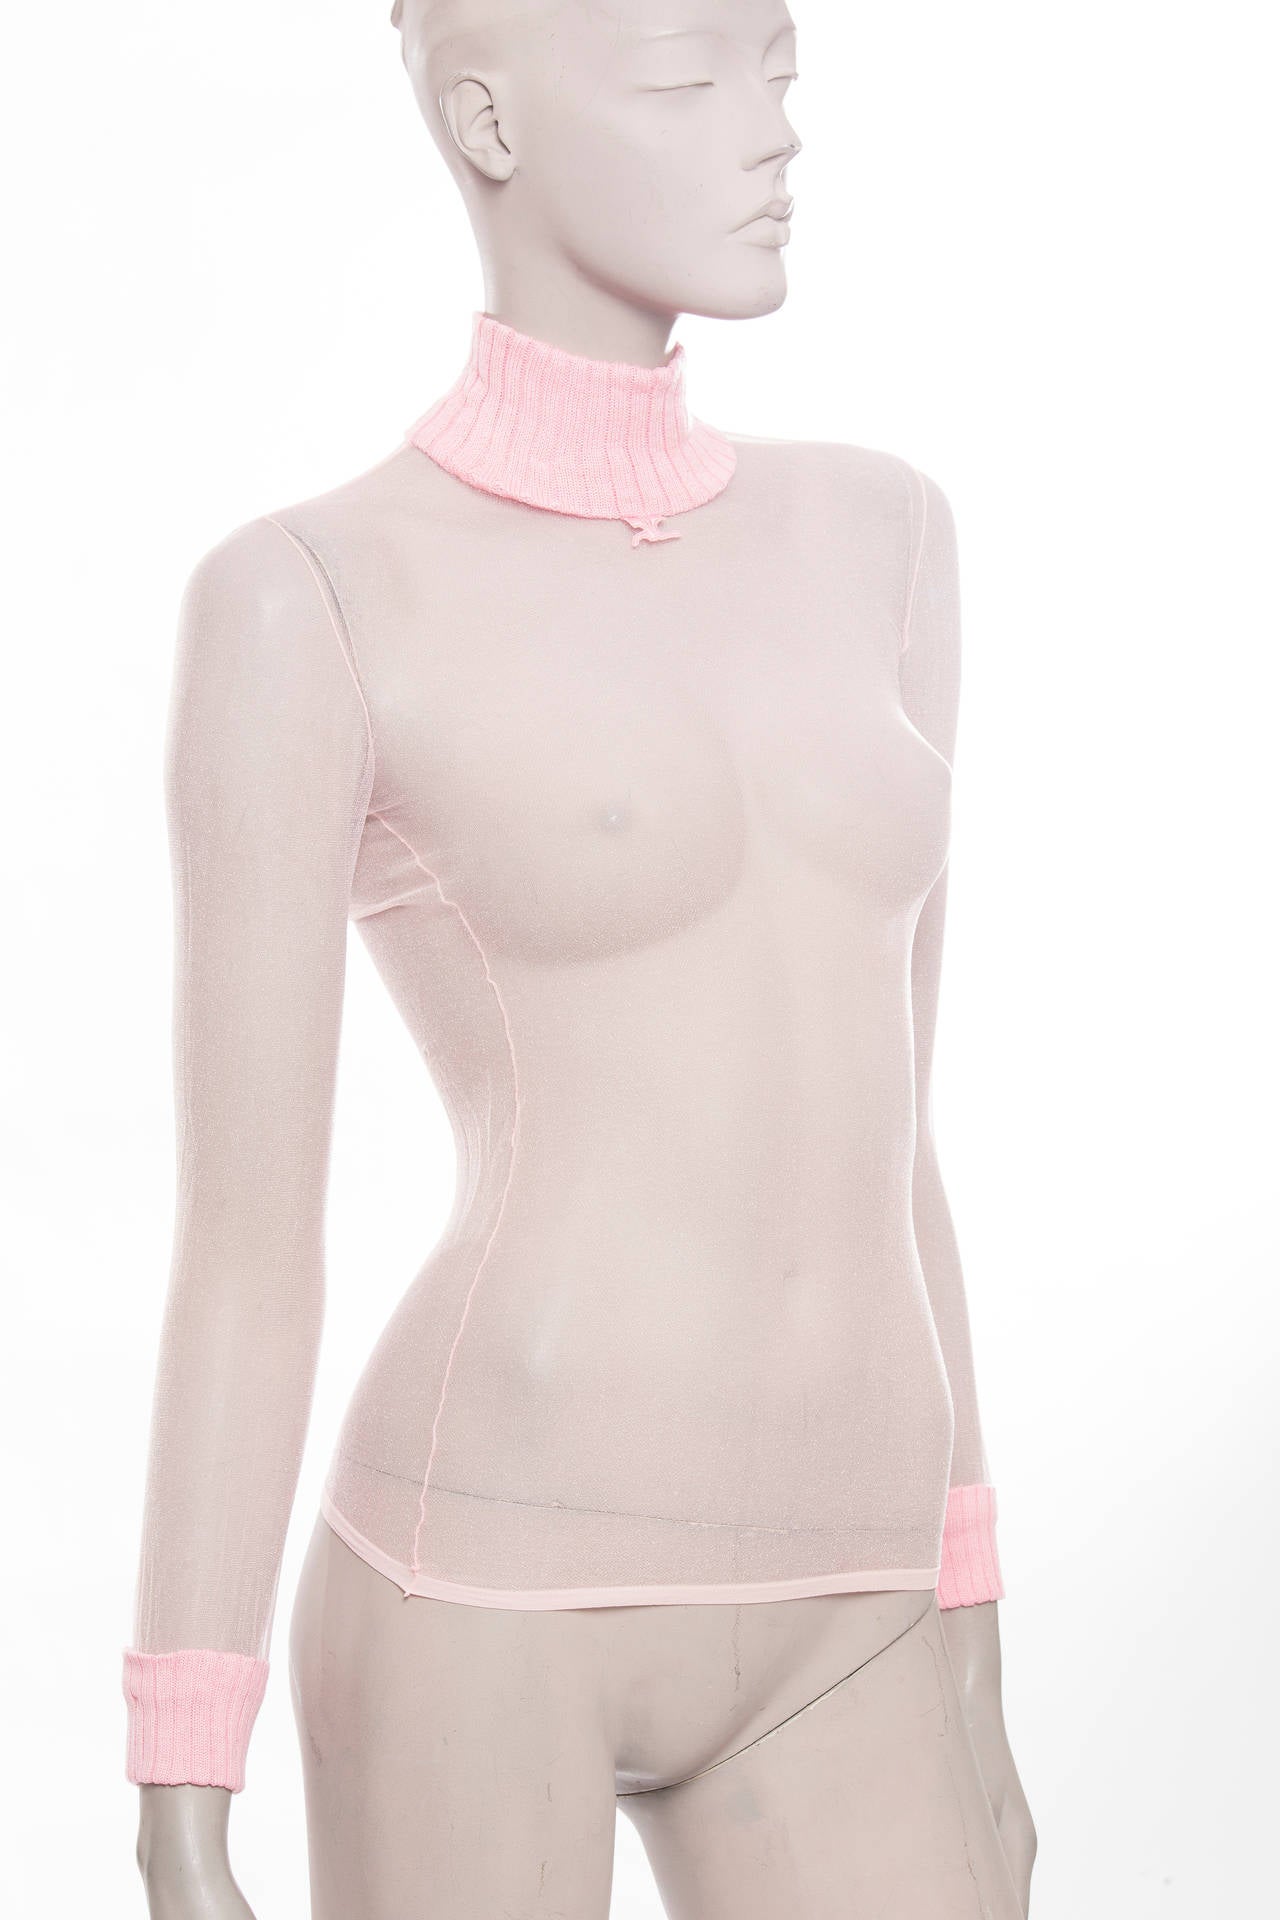 Courreges, circa 1960's stretch nylon, sheer turtleneck with original packaging